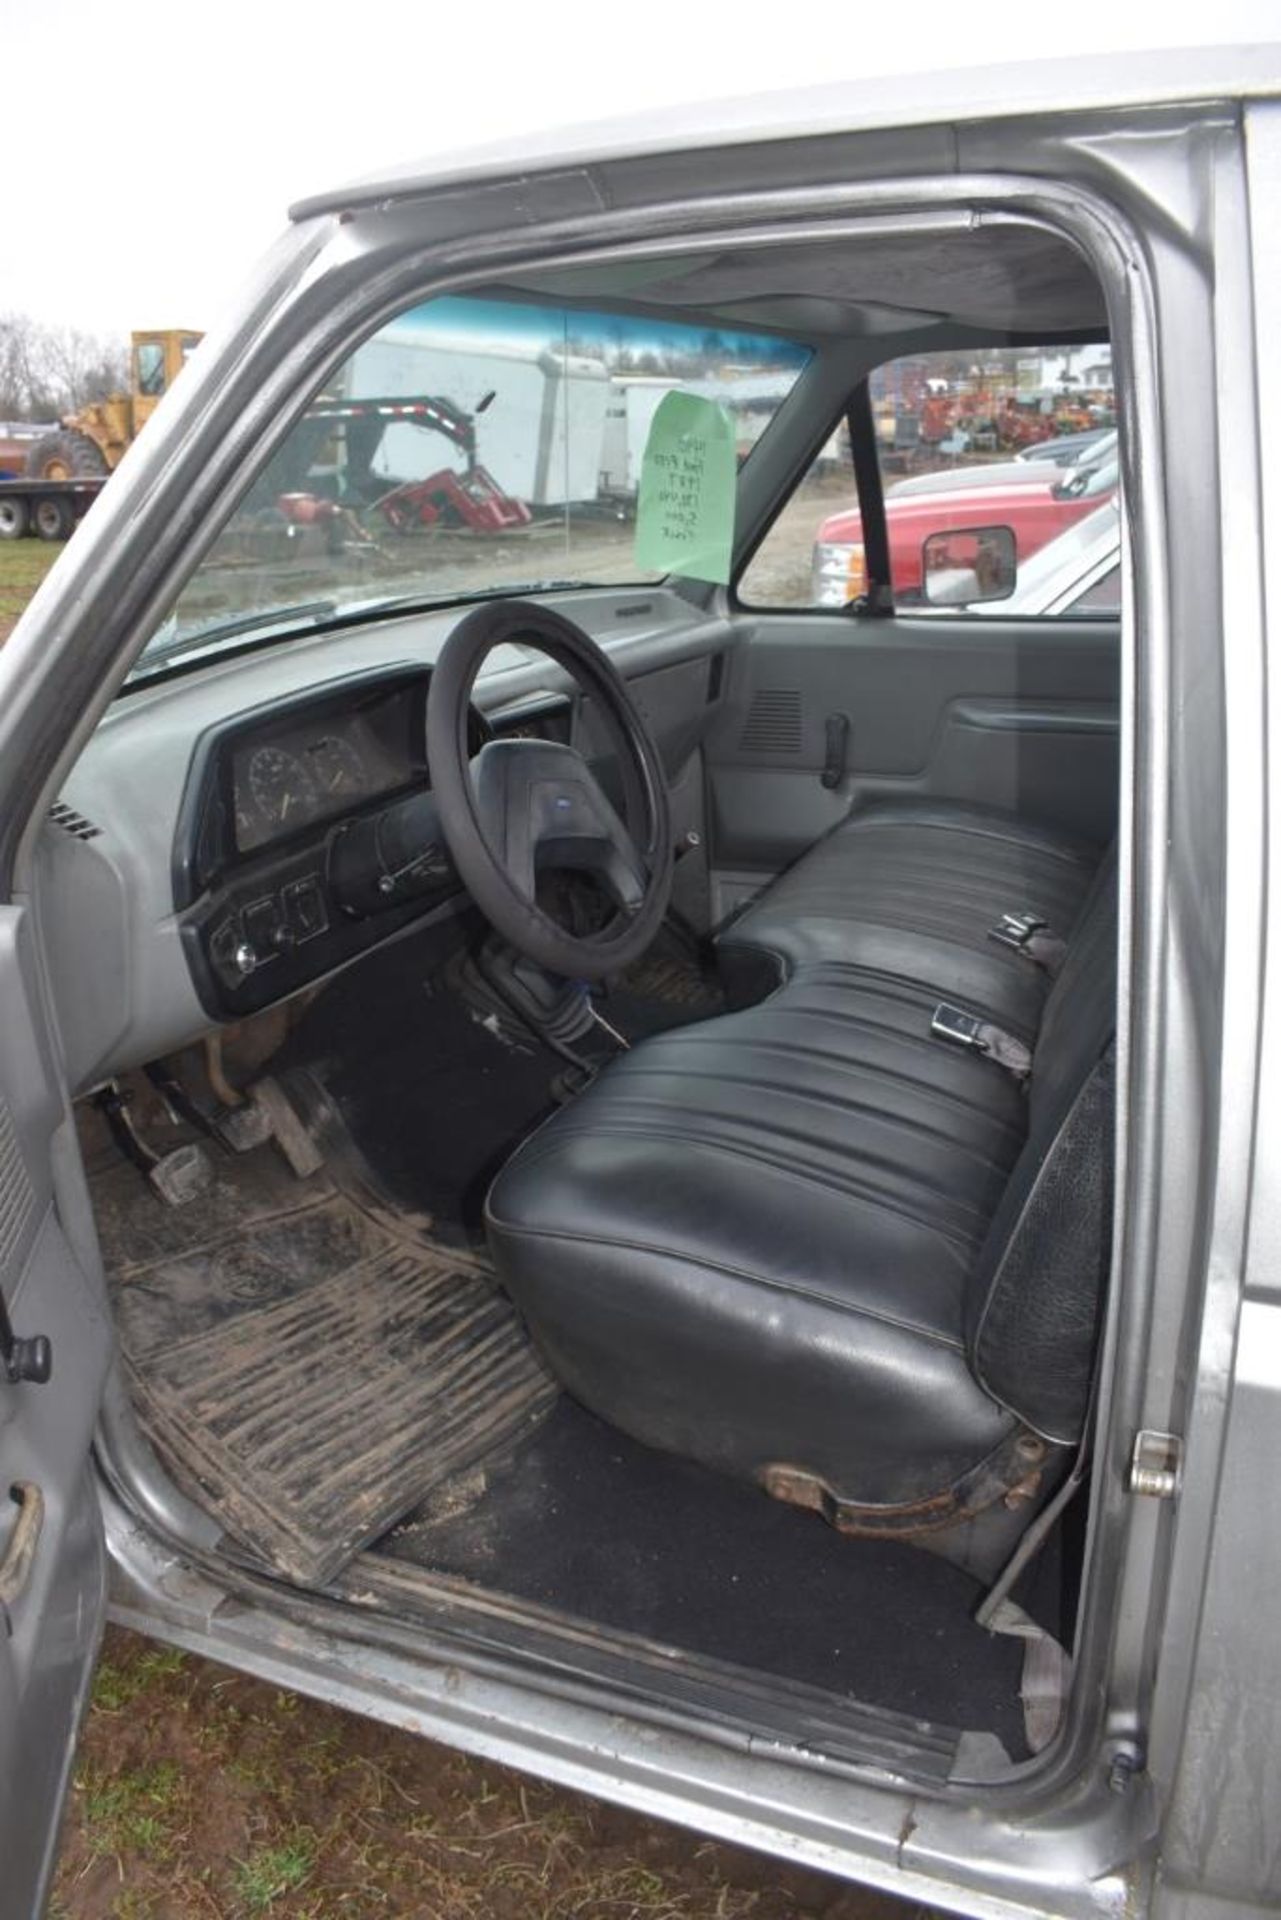 1987 Ford F-150 Truck - Image 27 of 36